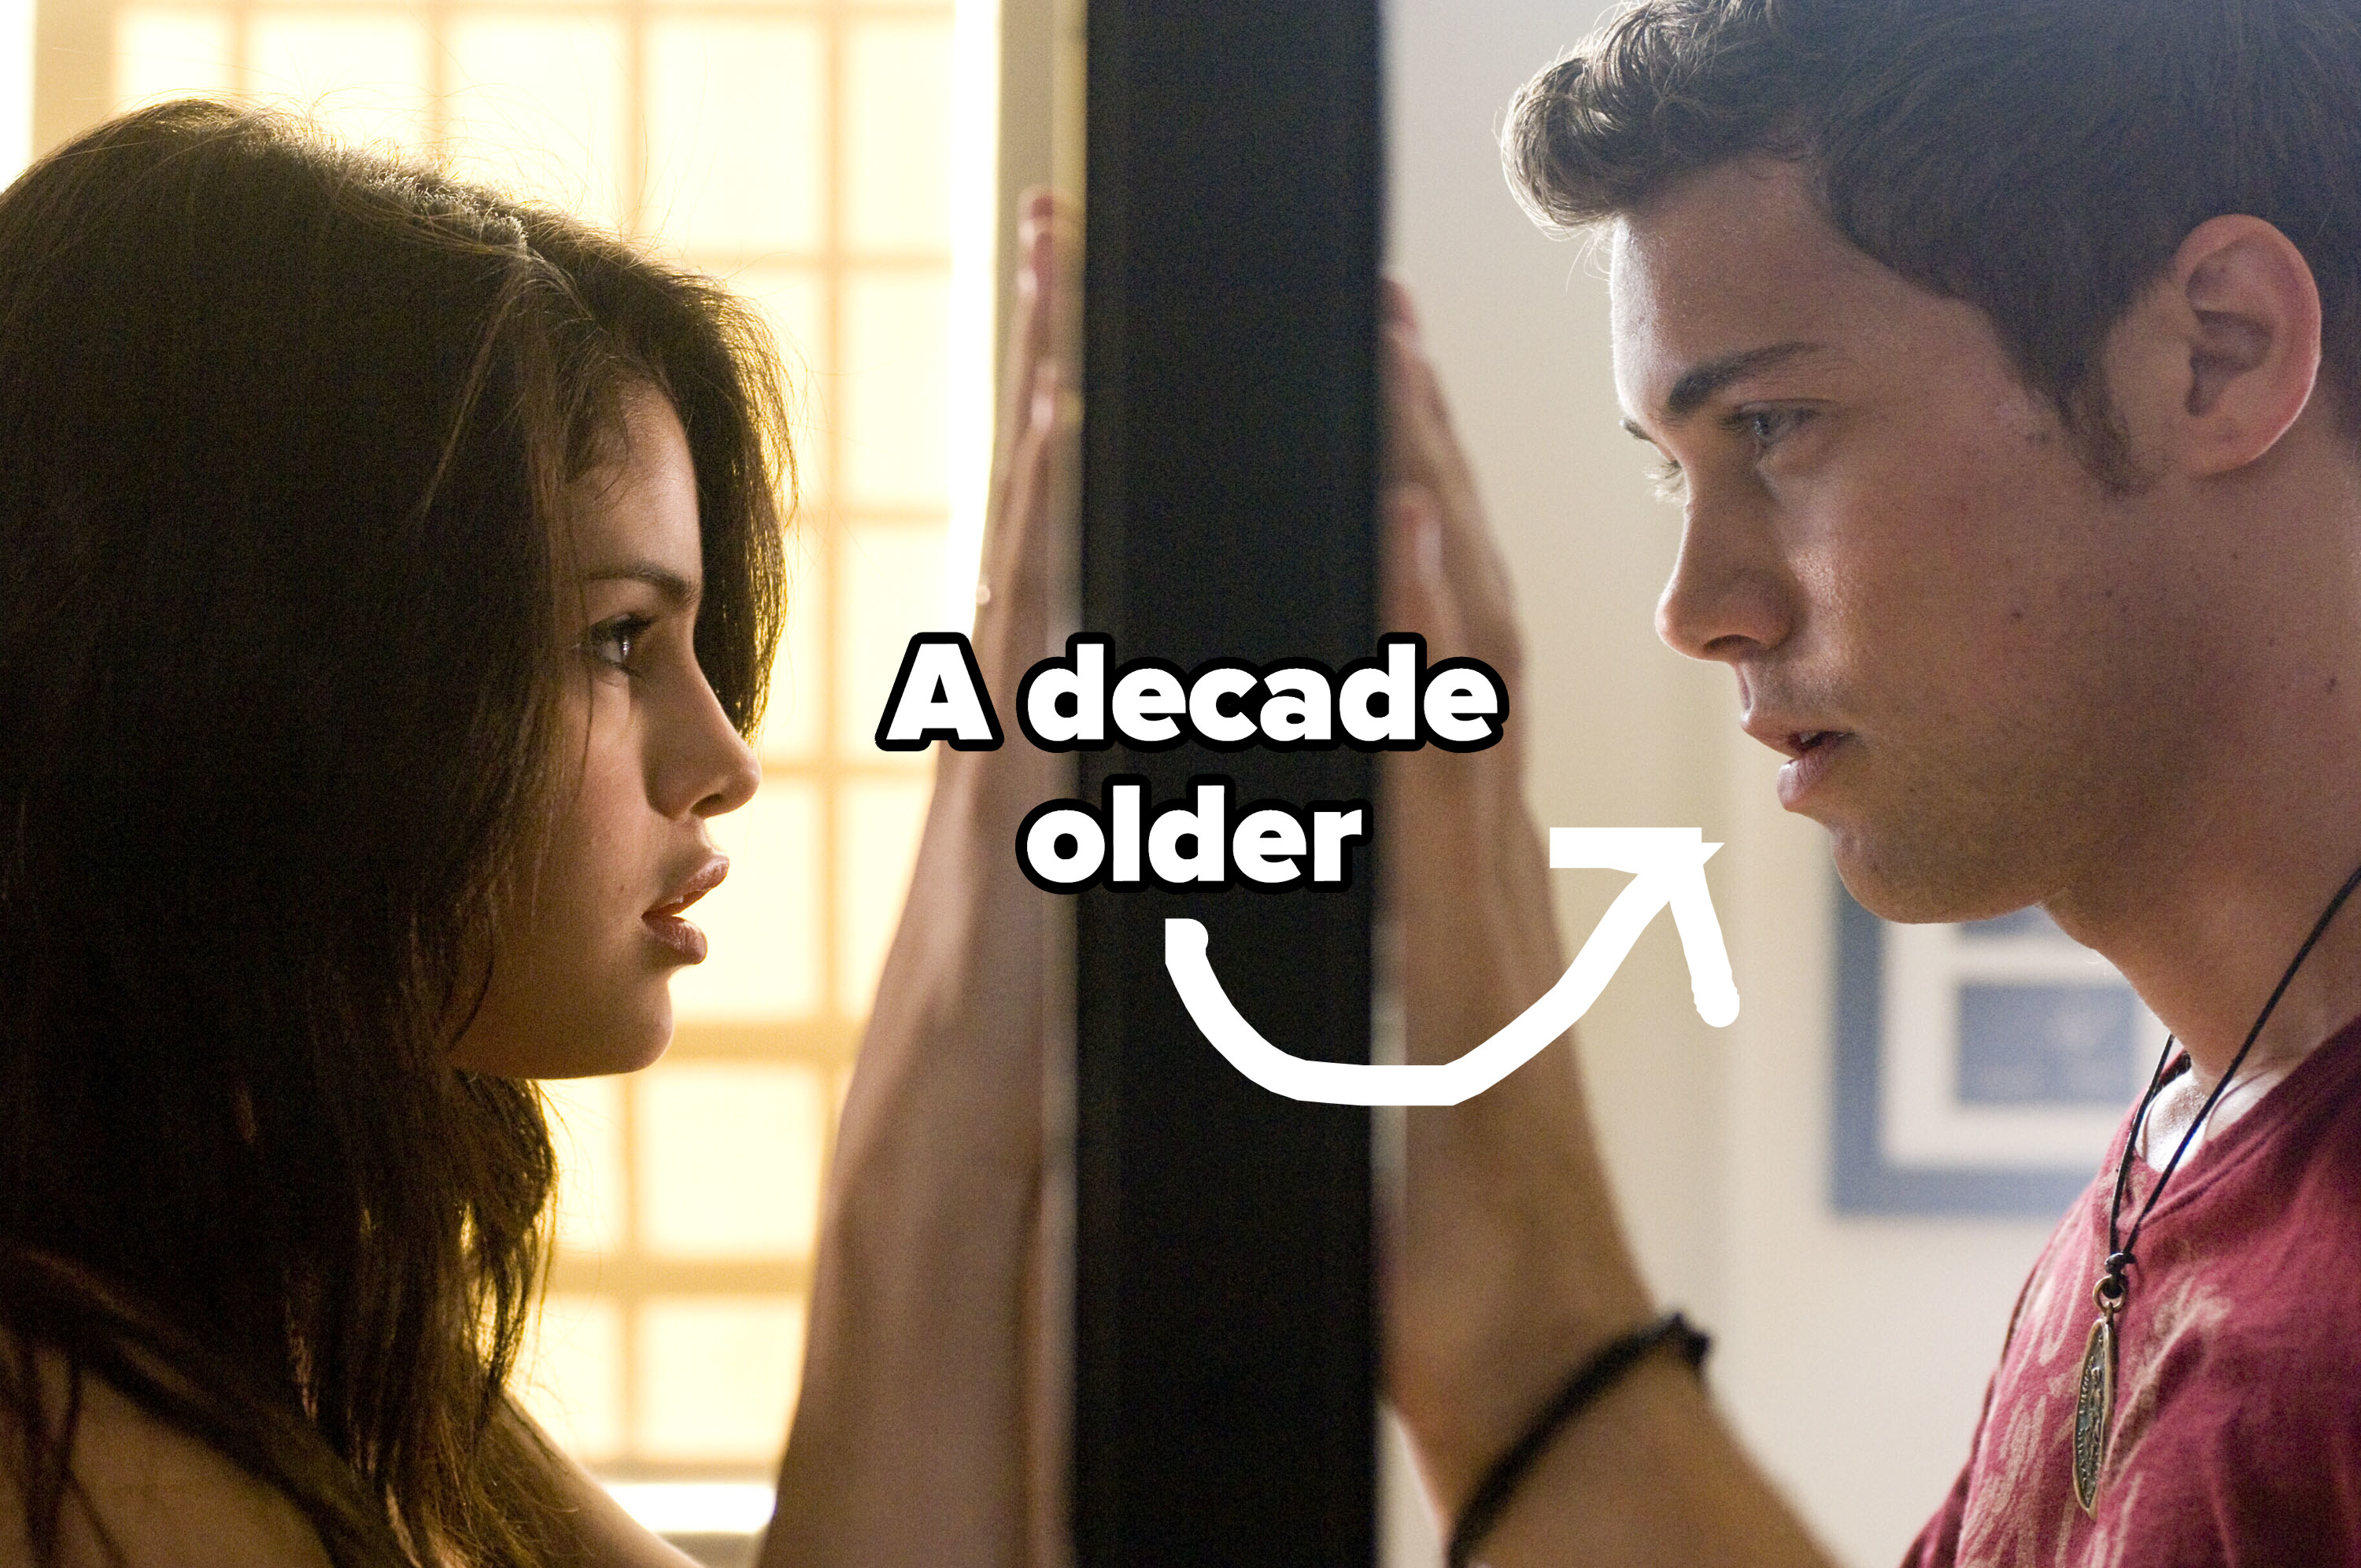 Selena and Drew Seeley dancing on opposite sides of a mirror